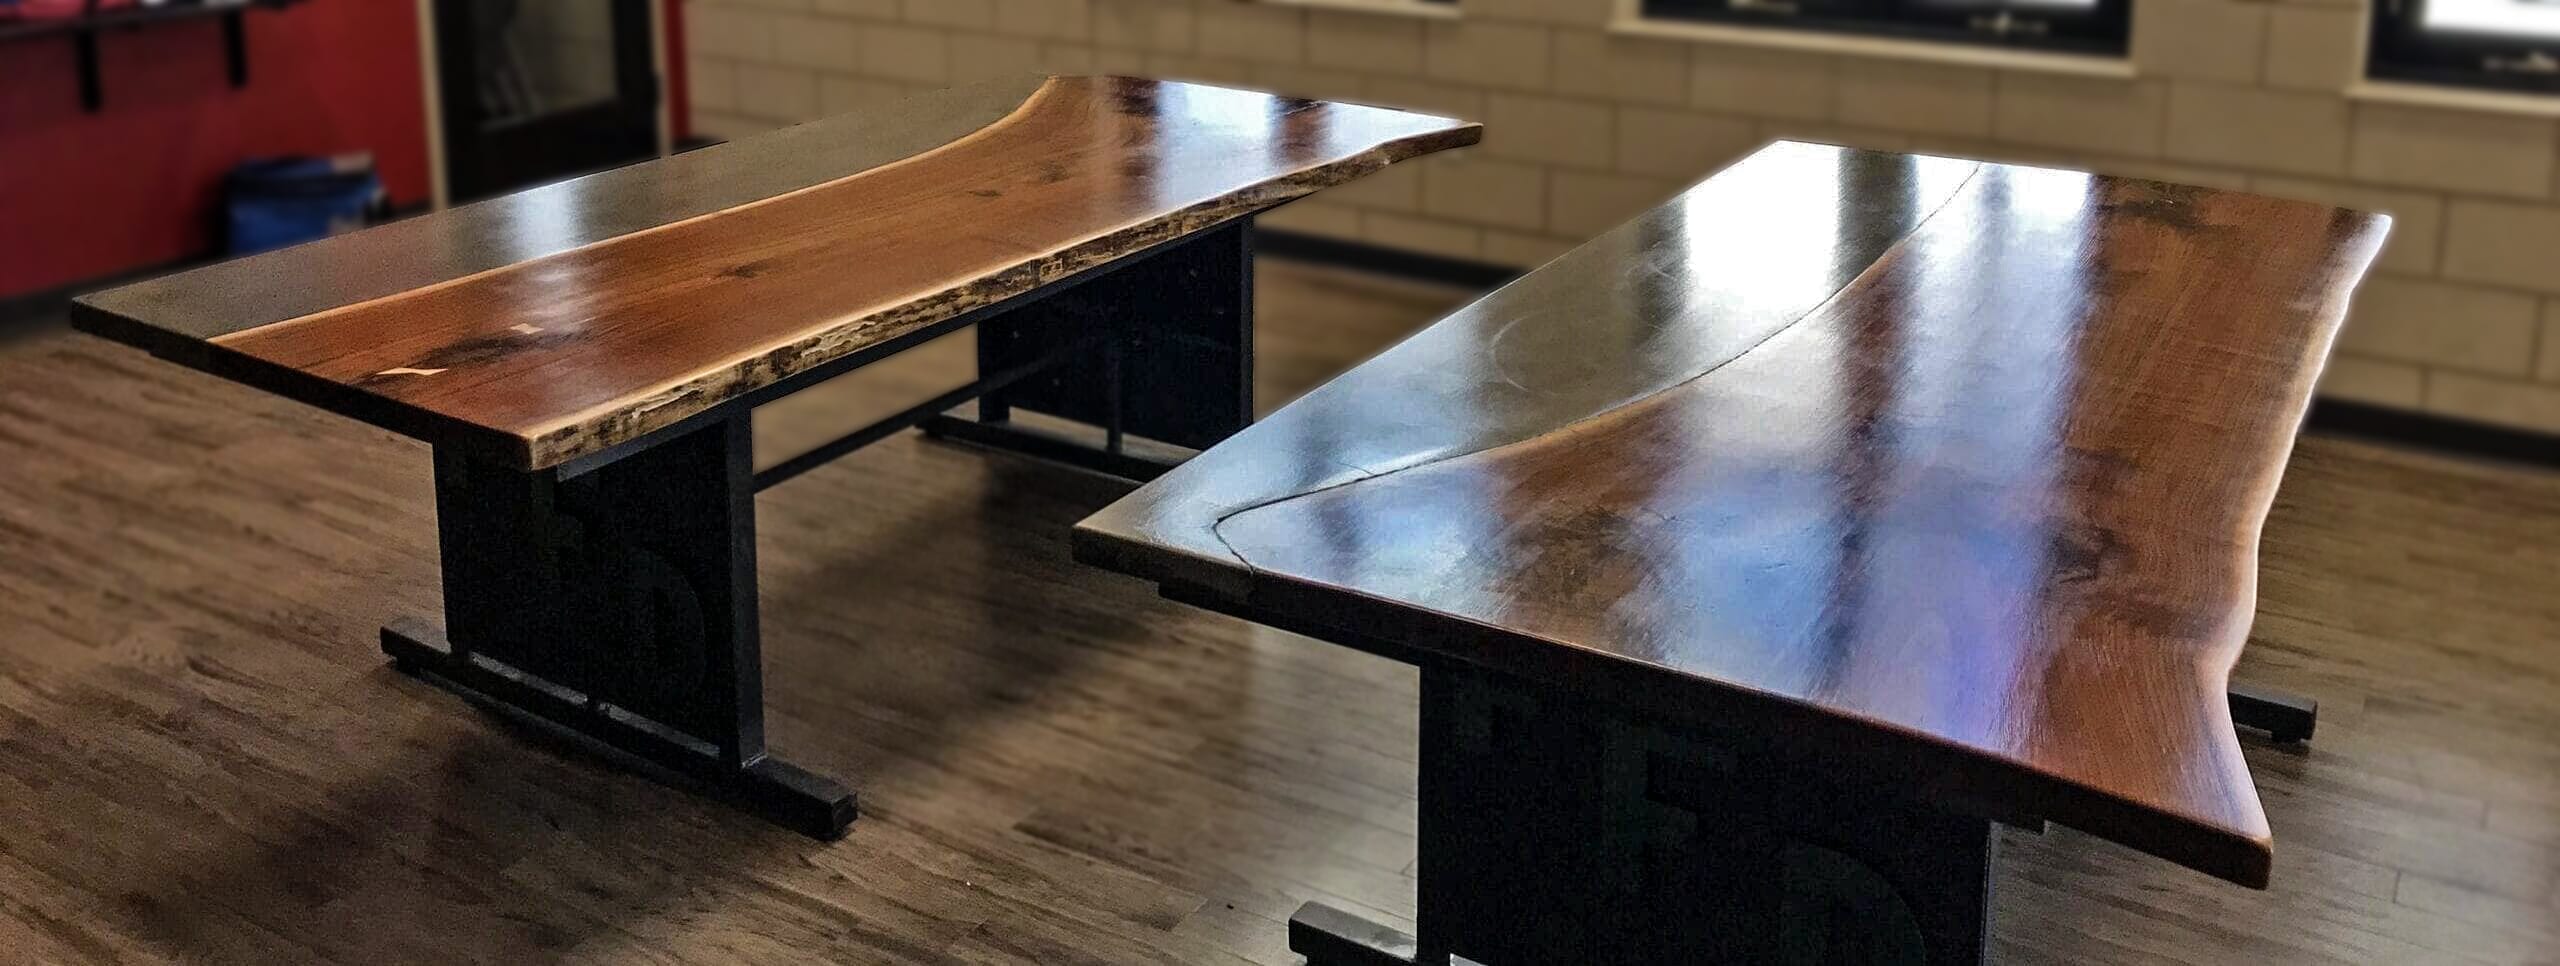 Dye Stained Concrete & Wood Tables